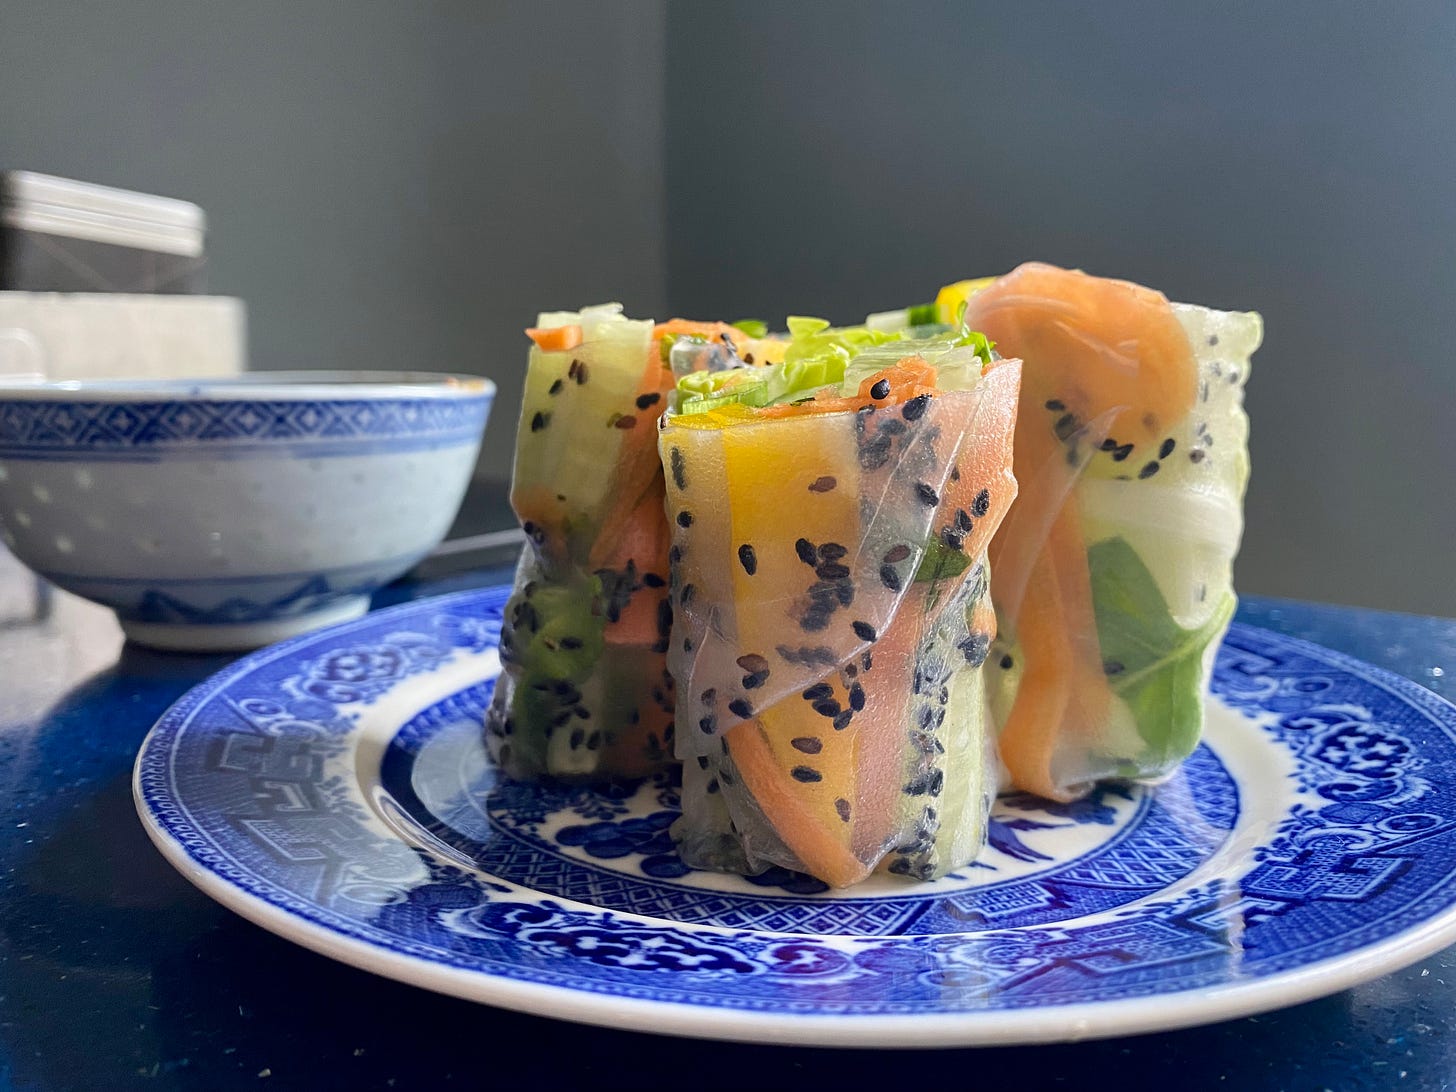 Rice paper rolls arranged on a blue and white plate. Through the rice paper wrappers, carrot, peppers, lettuce and black sesame seeds are visible